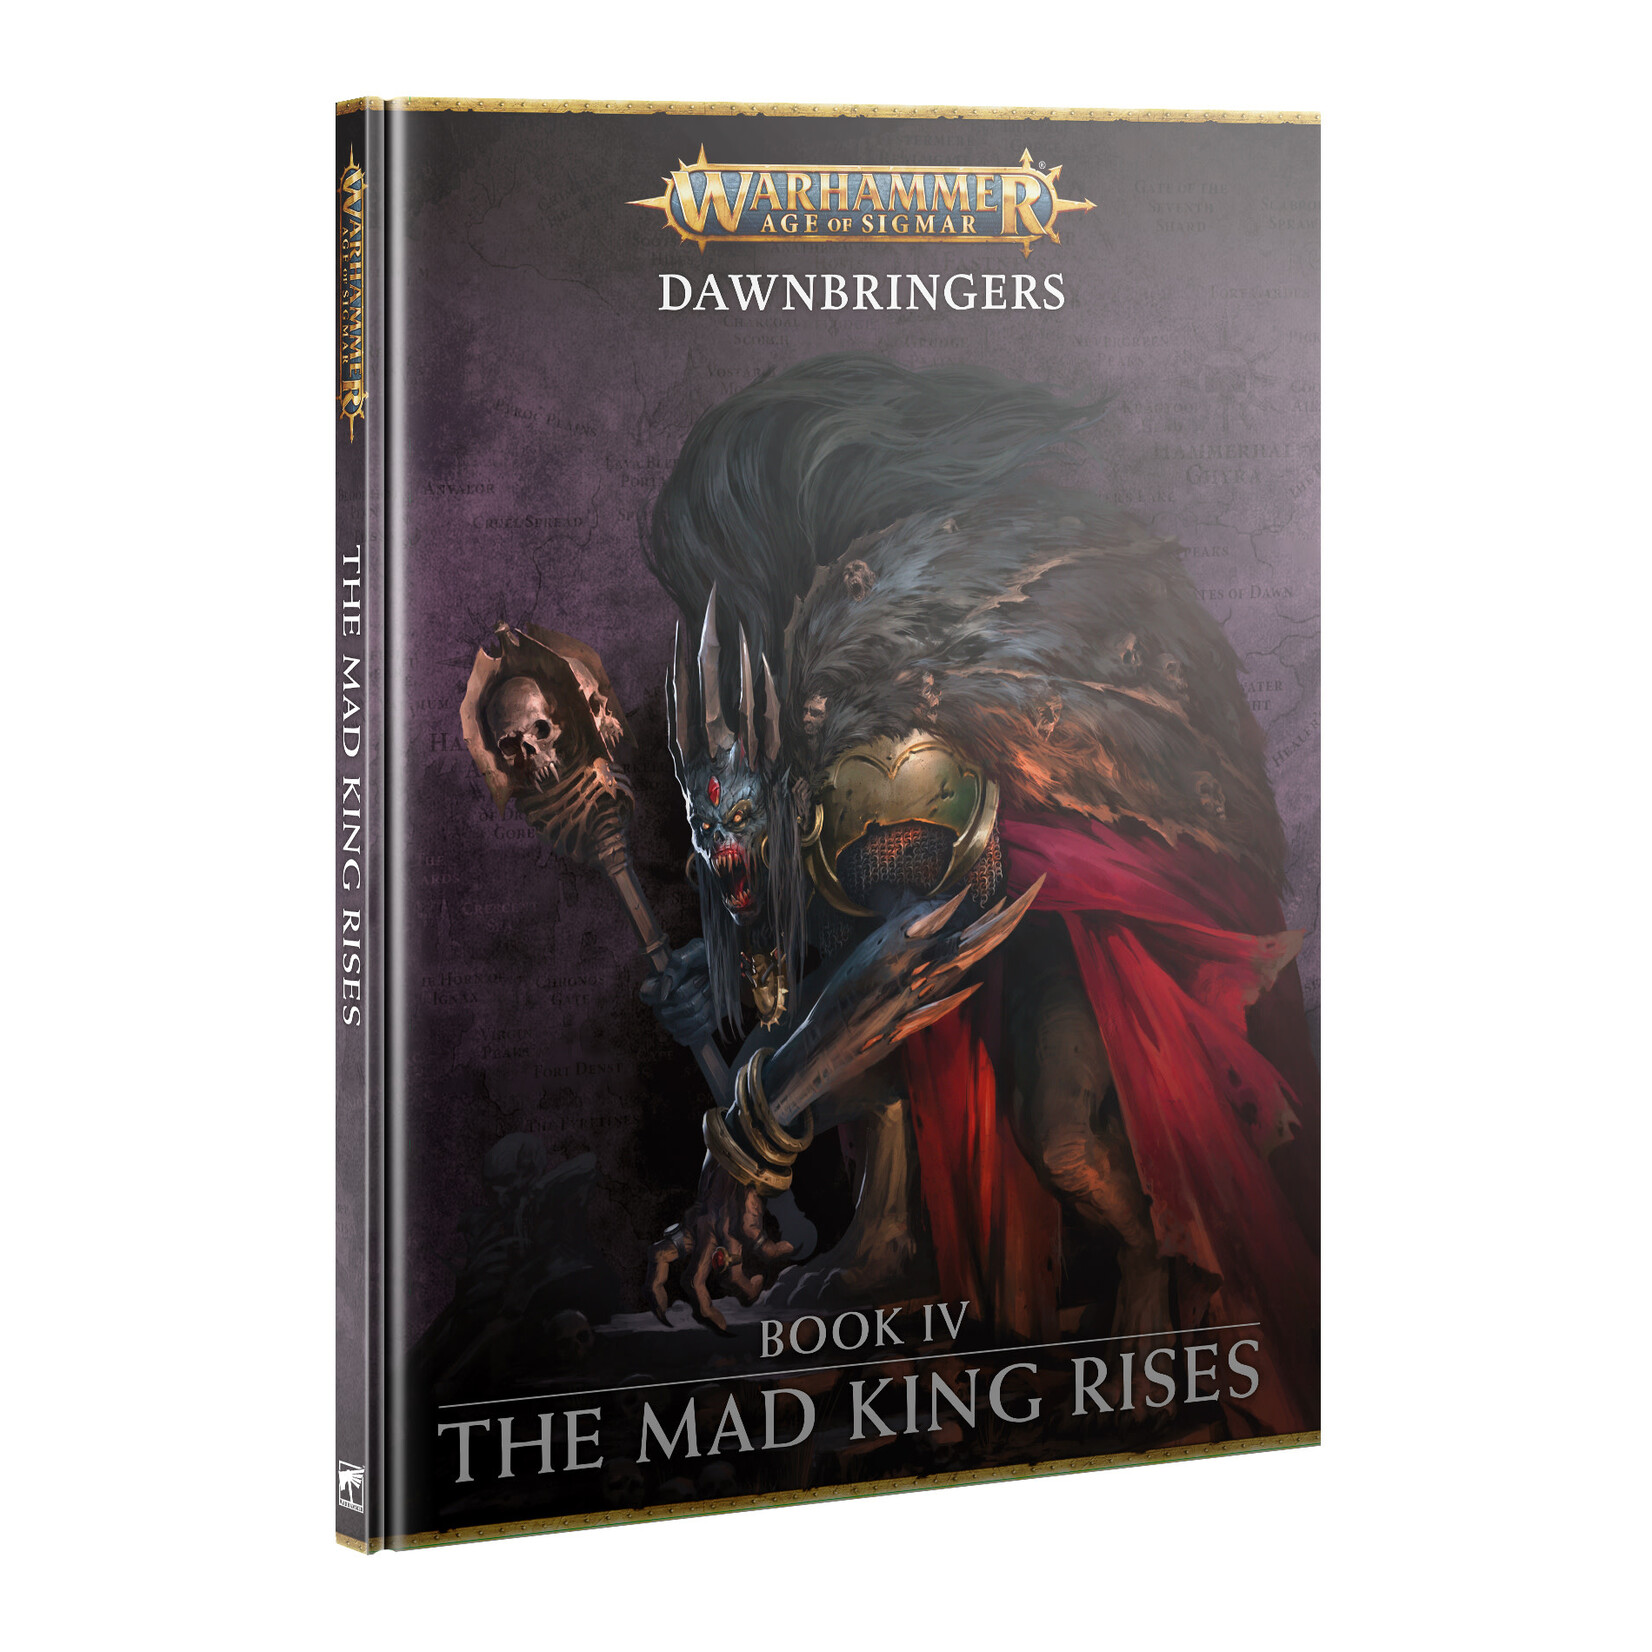 The Mad King Rises (AOS)